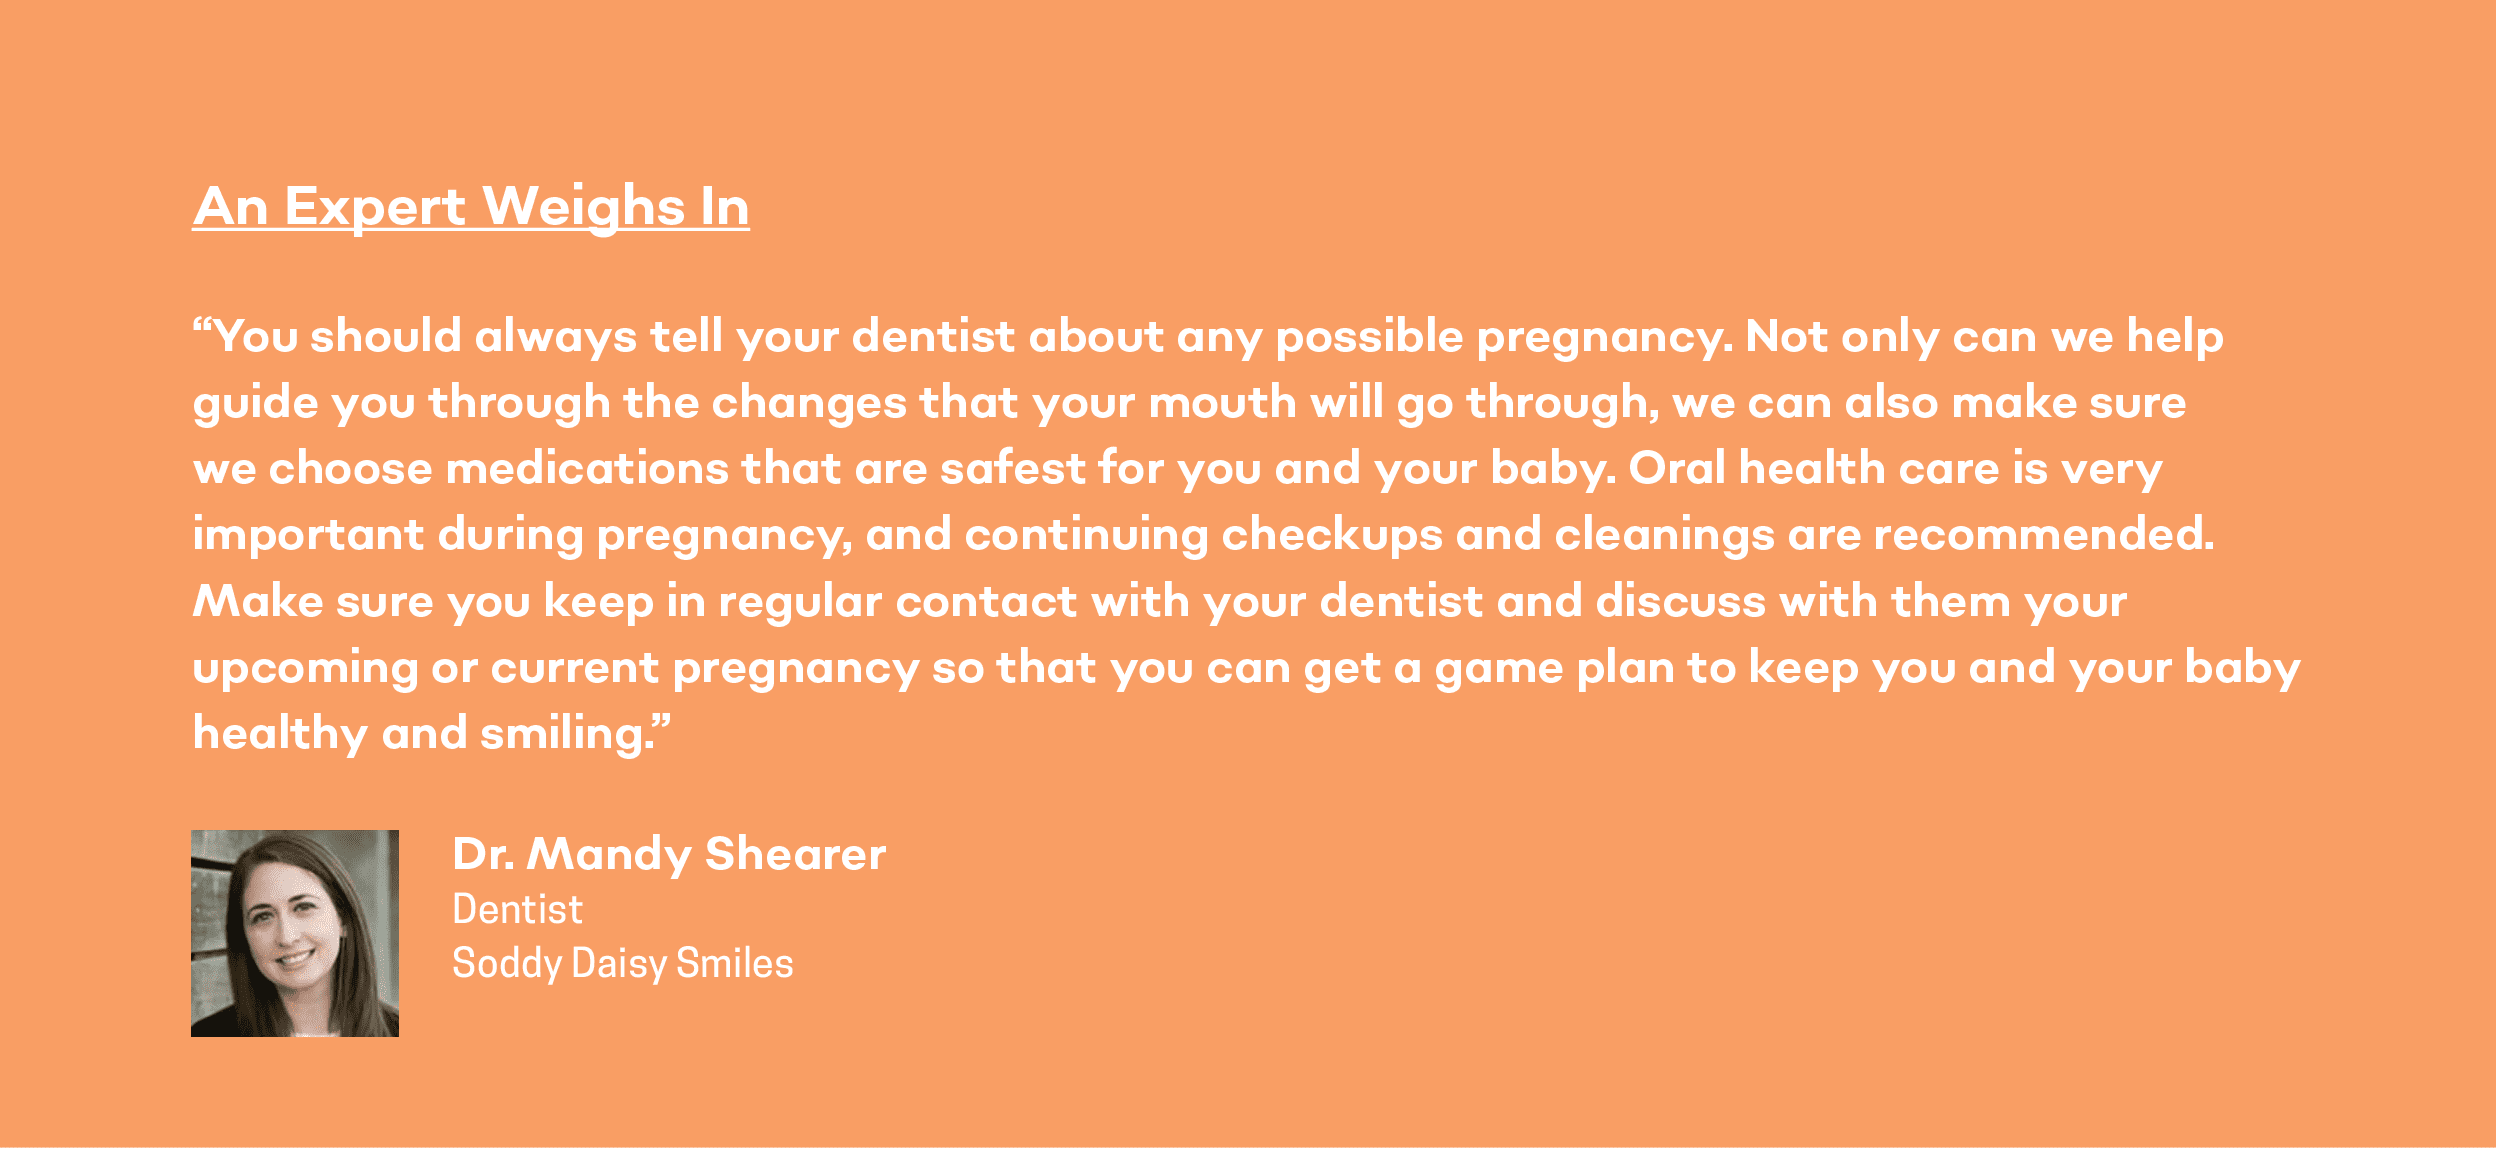 expert opinion about going to the dentist while pregnant in chattanooga from dr. mandy shearer